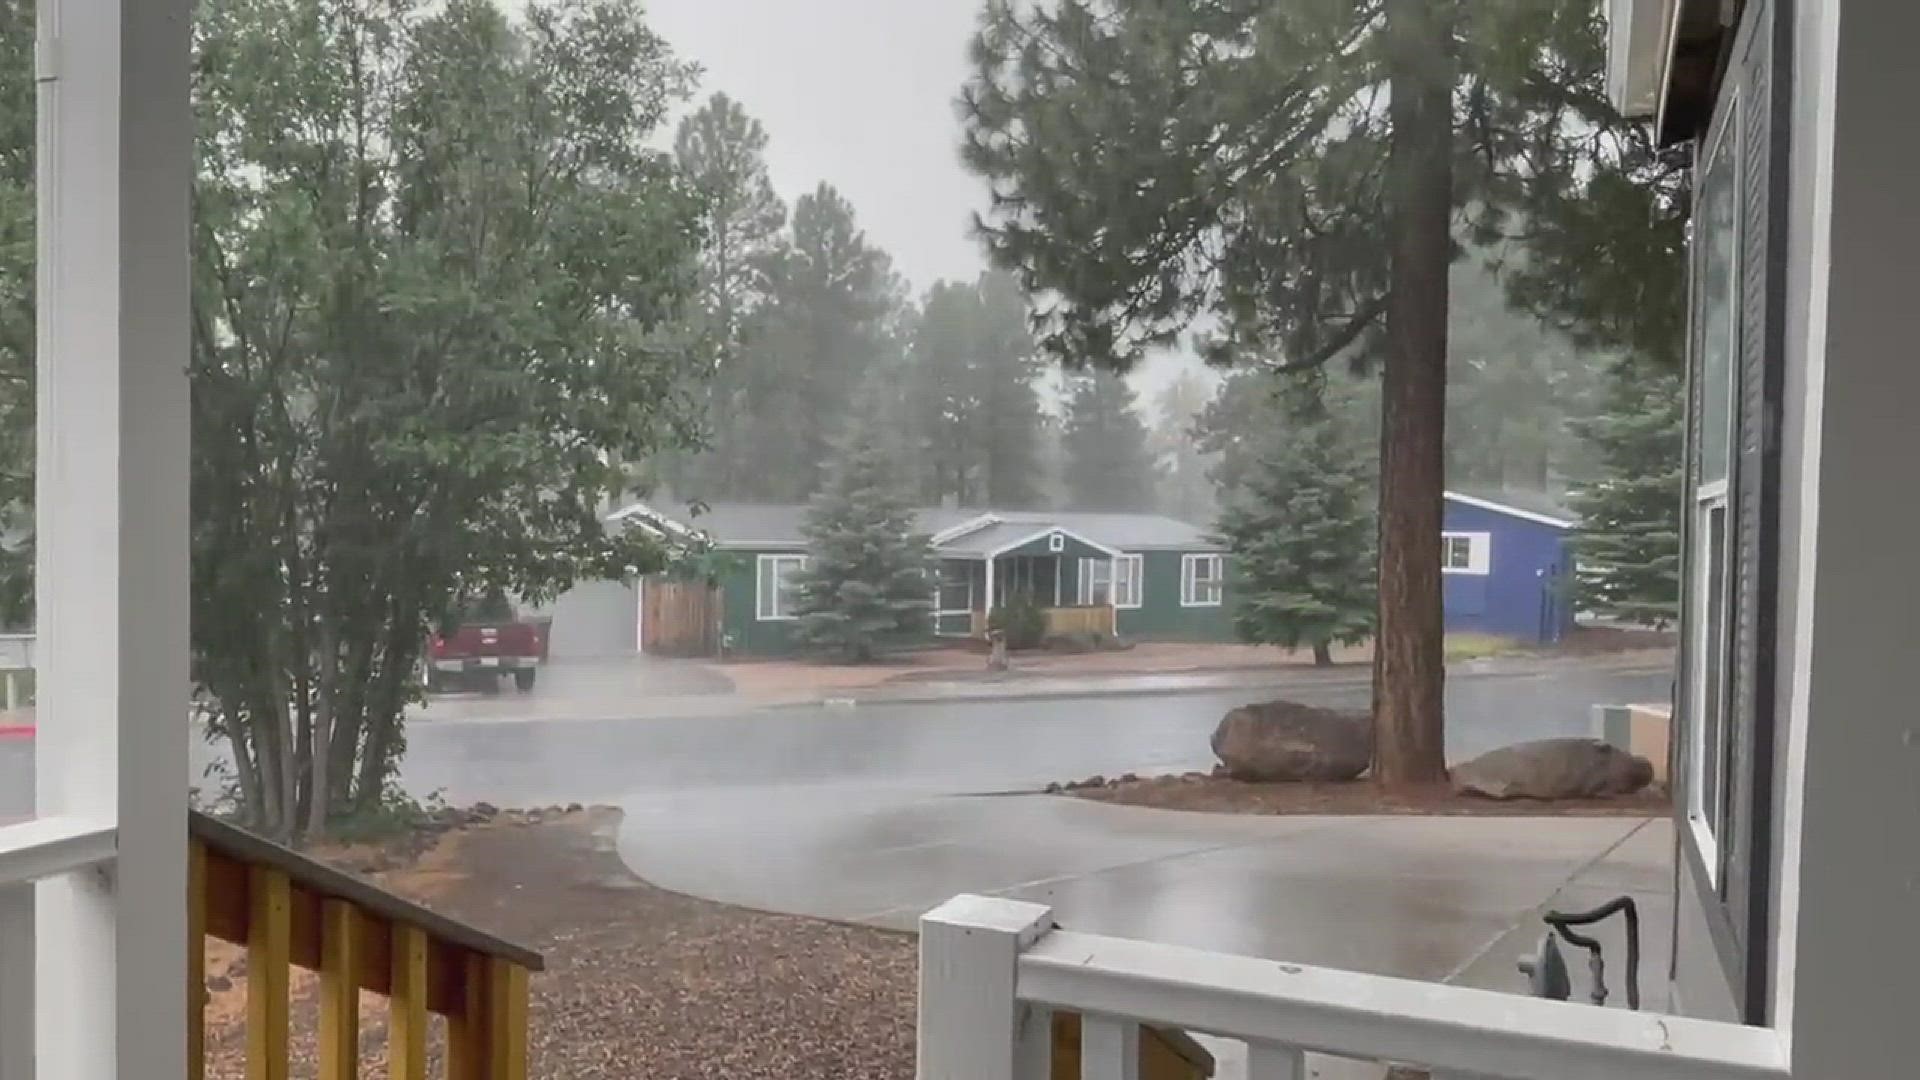 Early Monsoon rainfall spotted in West Flagstaff.